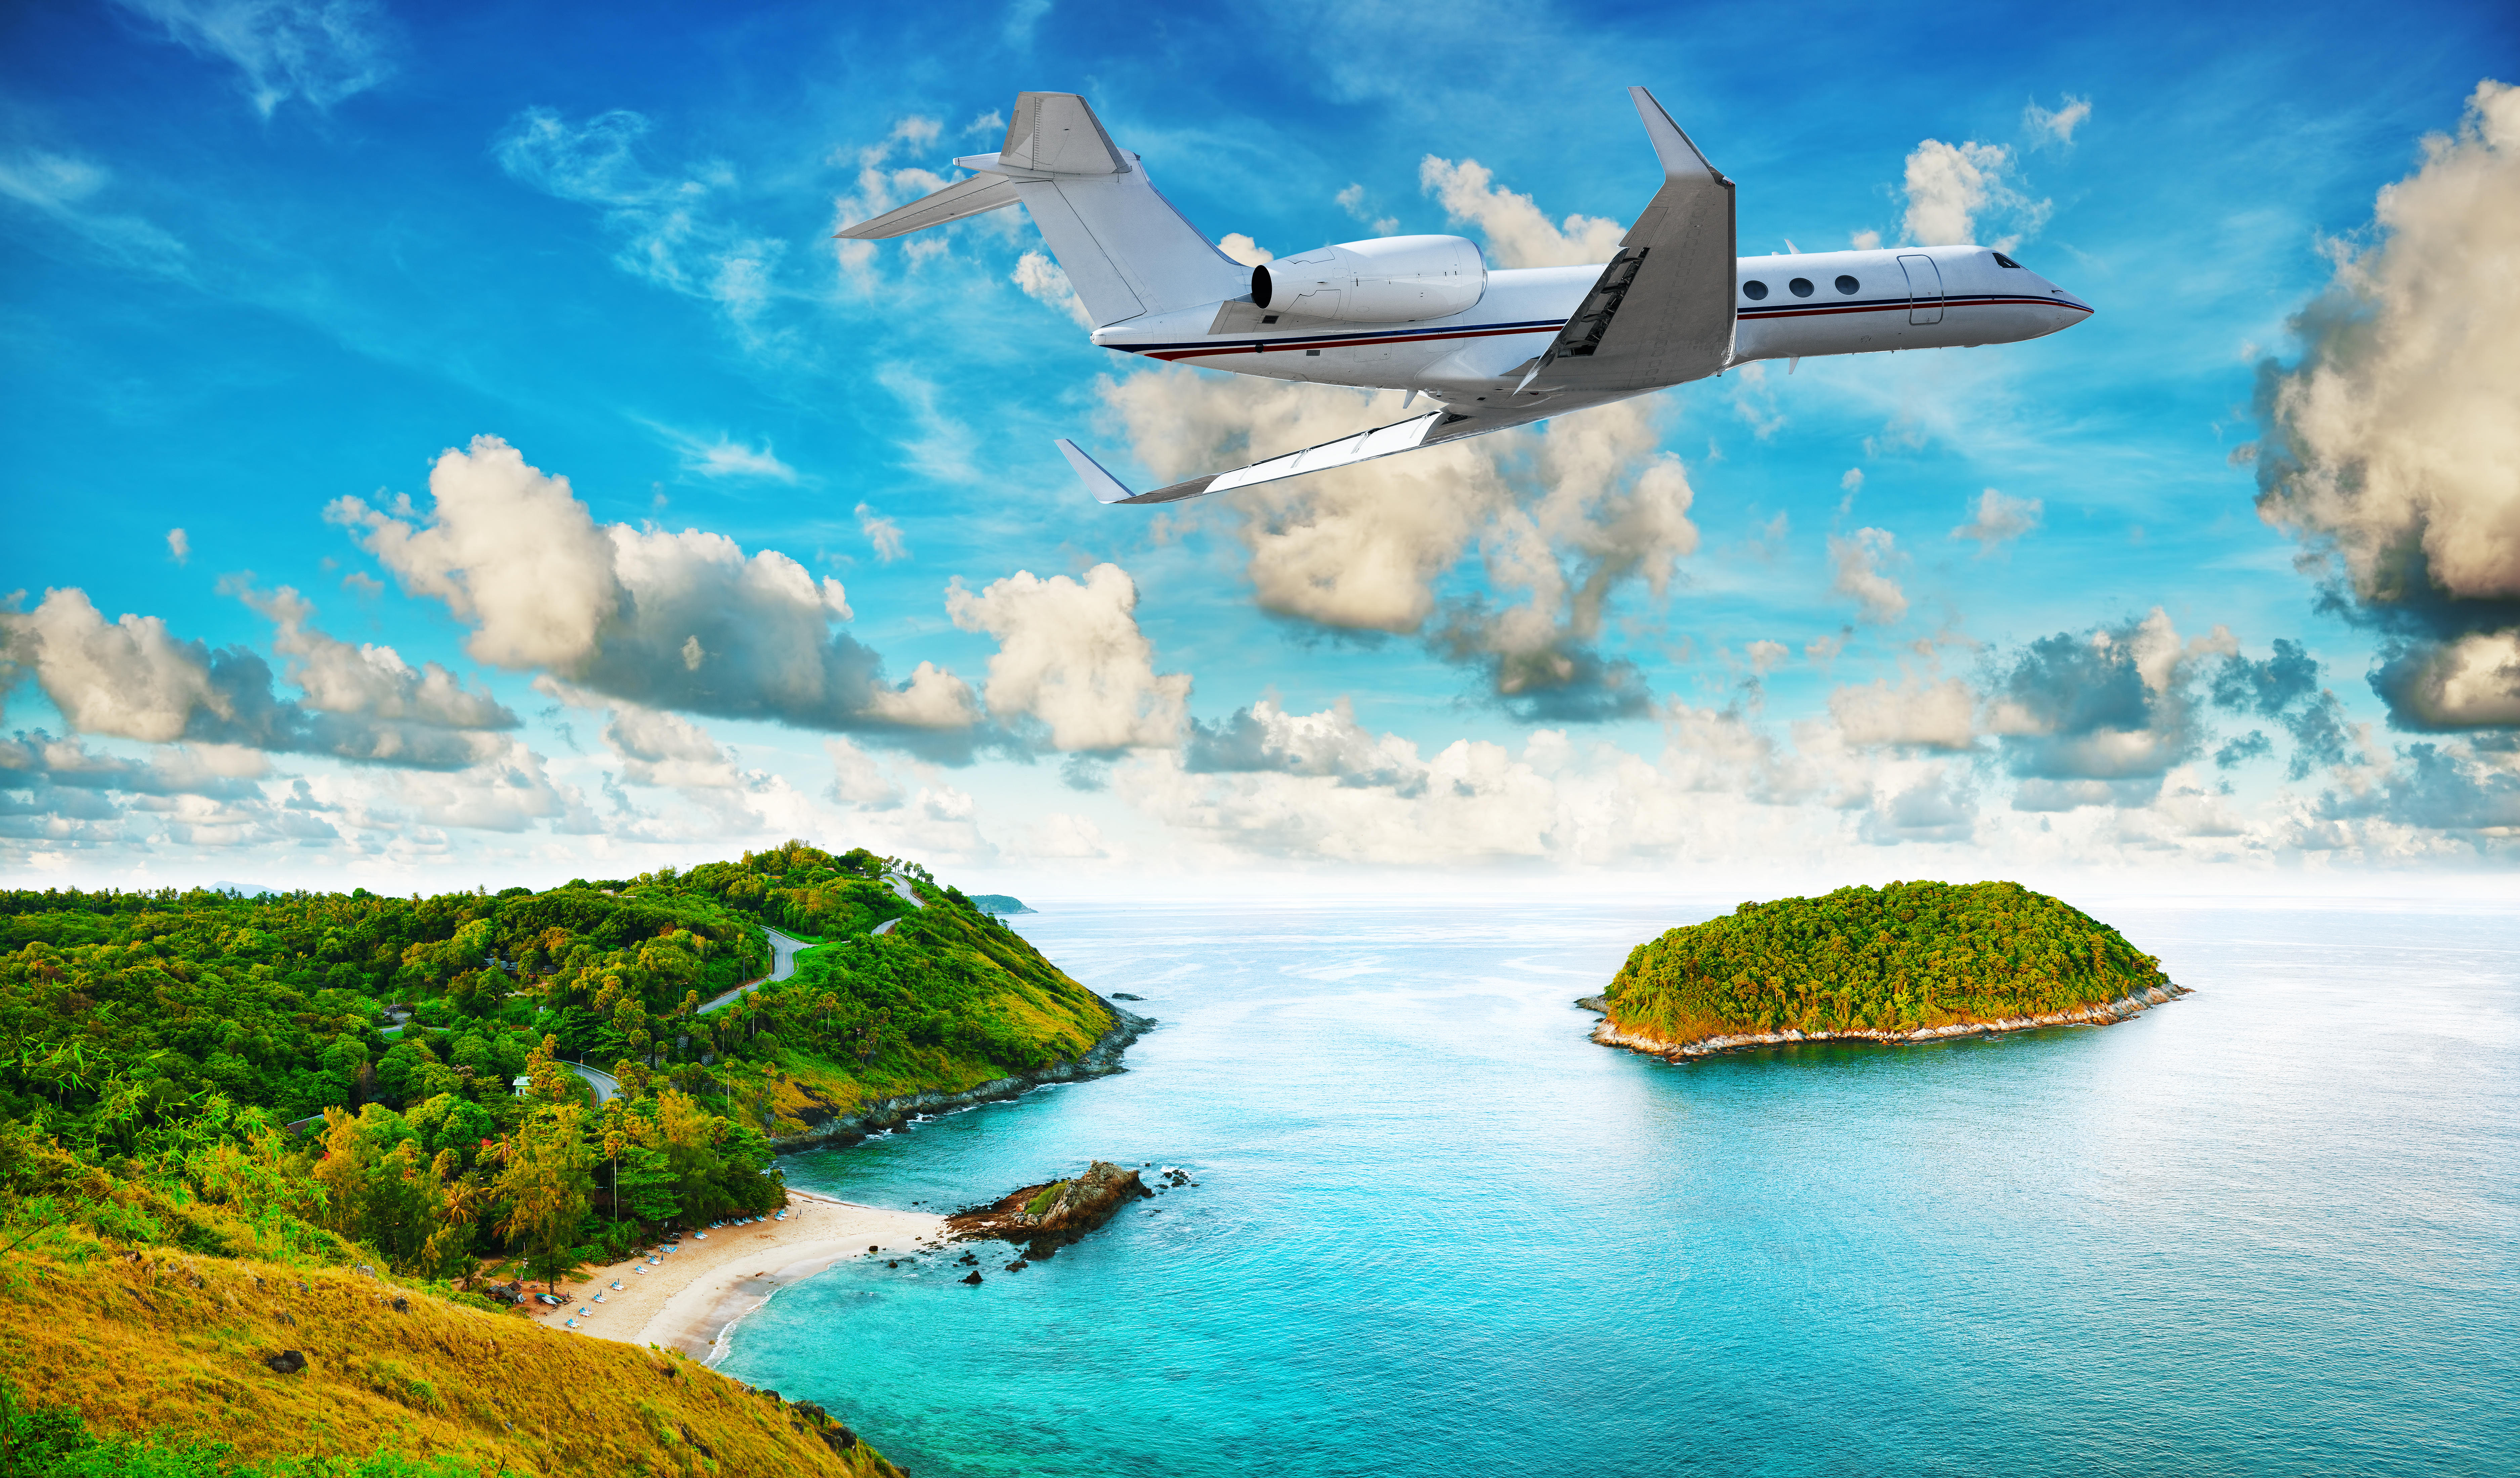 Wallpapers flying over the island sea tropics on the desktop